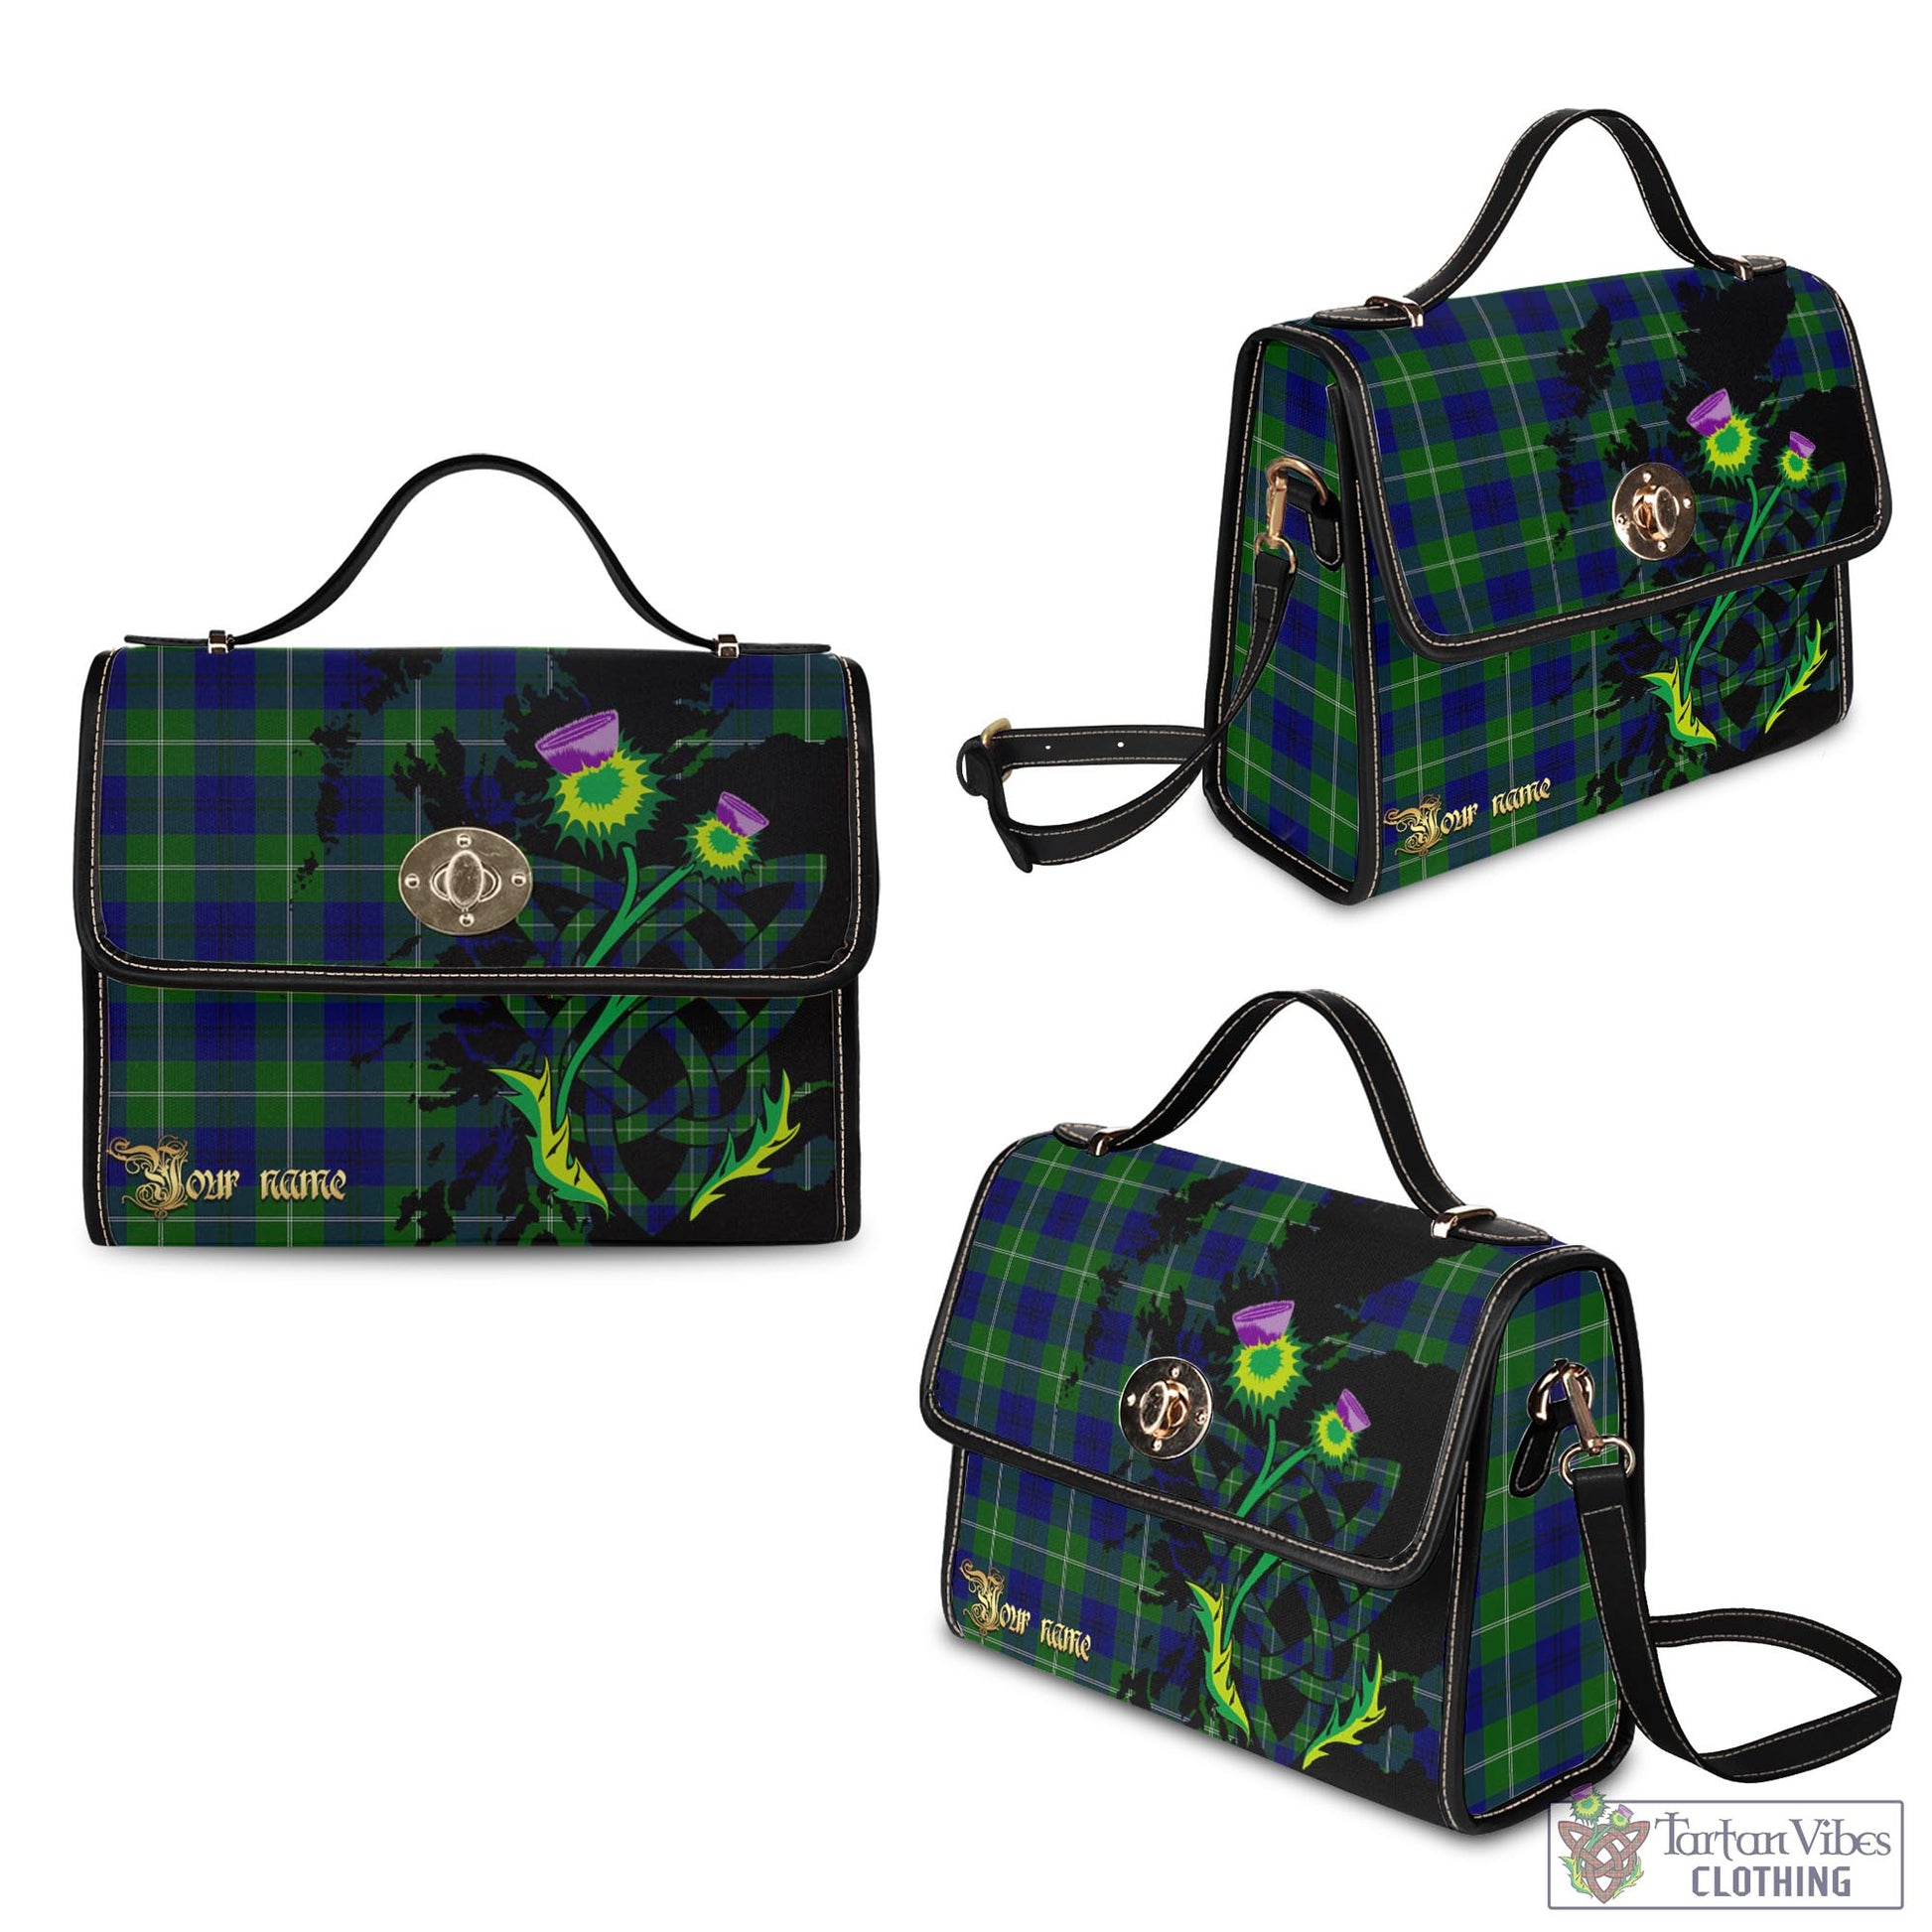 Tartan Vibes Clothing Oliphant Modern Tartan Waterproof Canvas Bag with Scotland Map and Thistle Celtic Accents